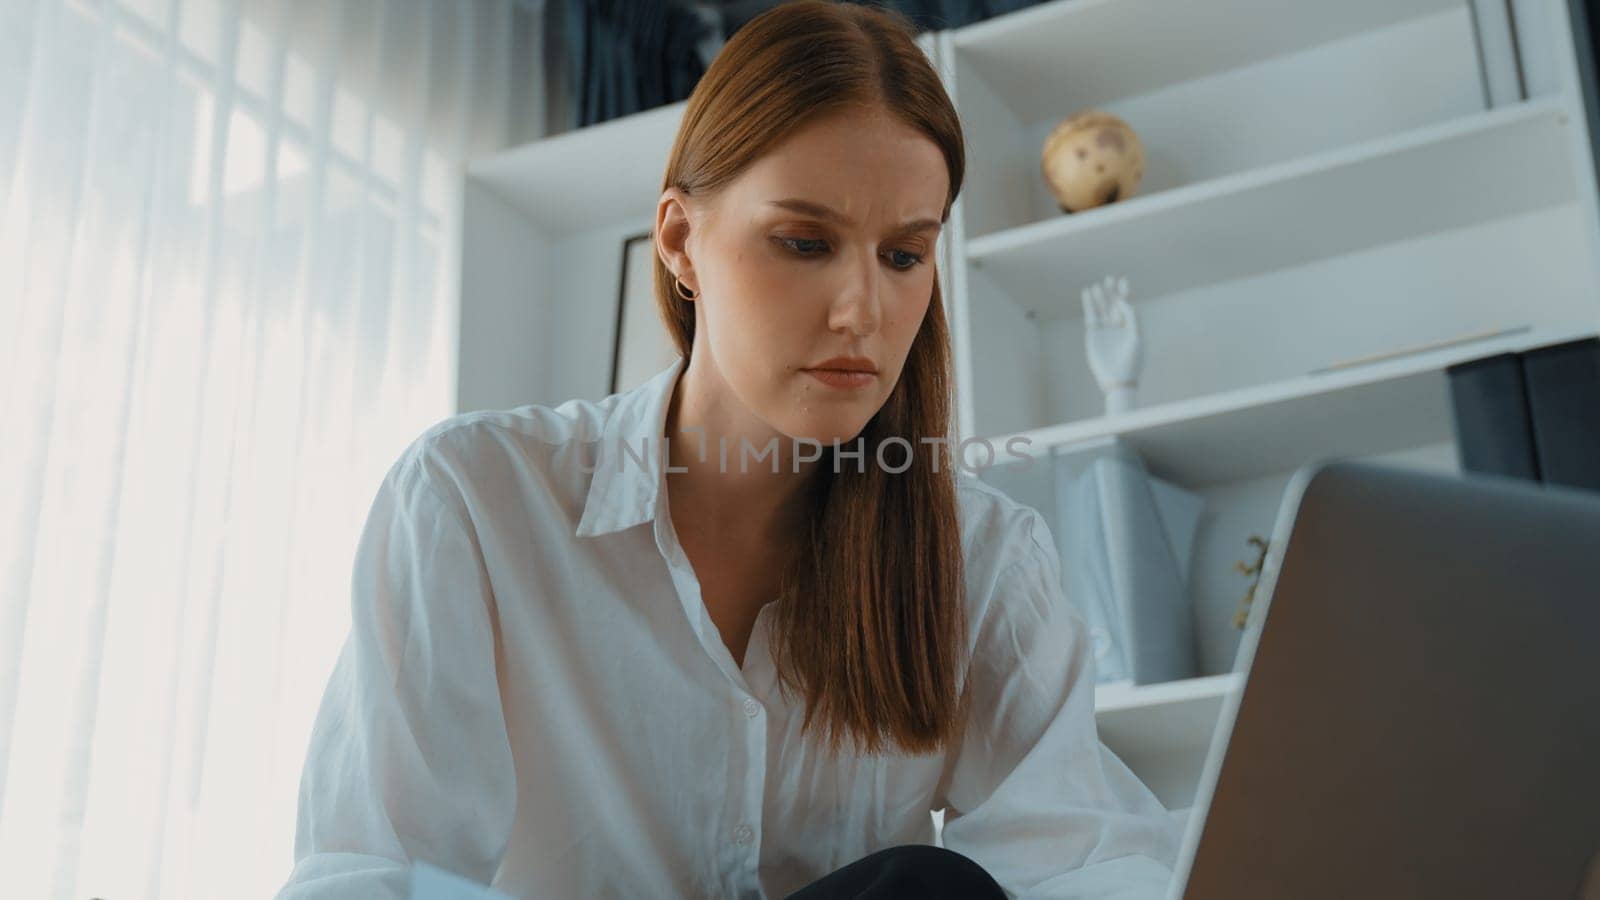 Young businesswoman sitting on the crouch using laptop computer for prim work on internet. Secretary or online content writing working at home. Remote working in domestic lifestyle/